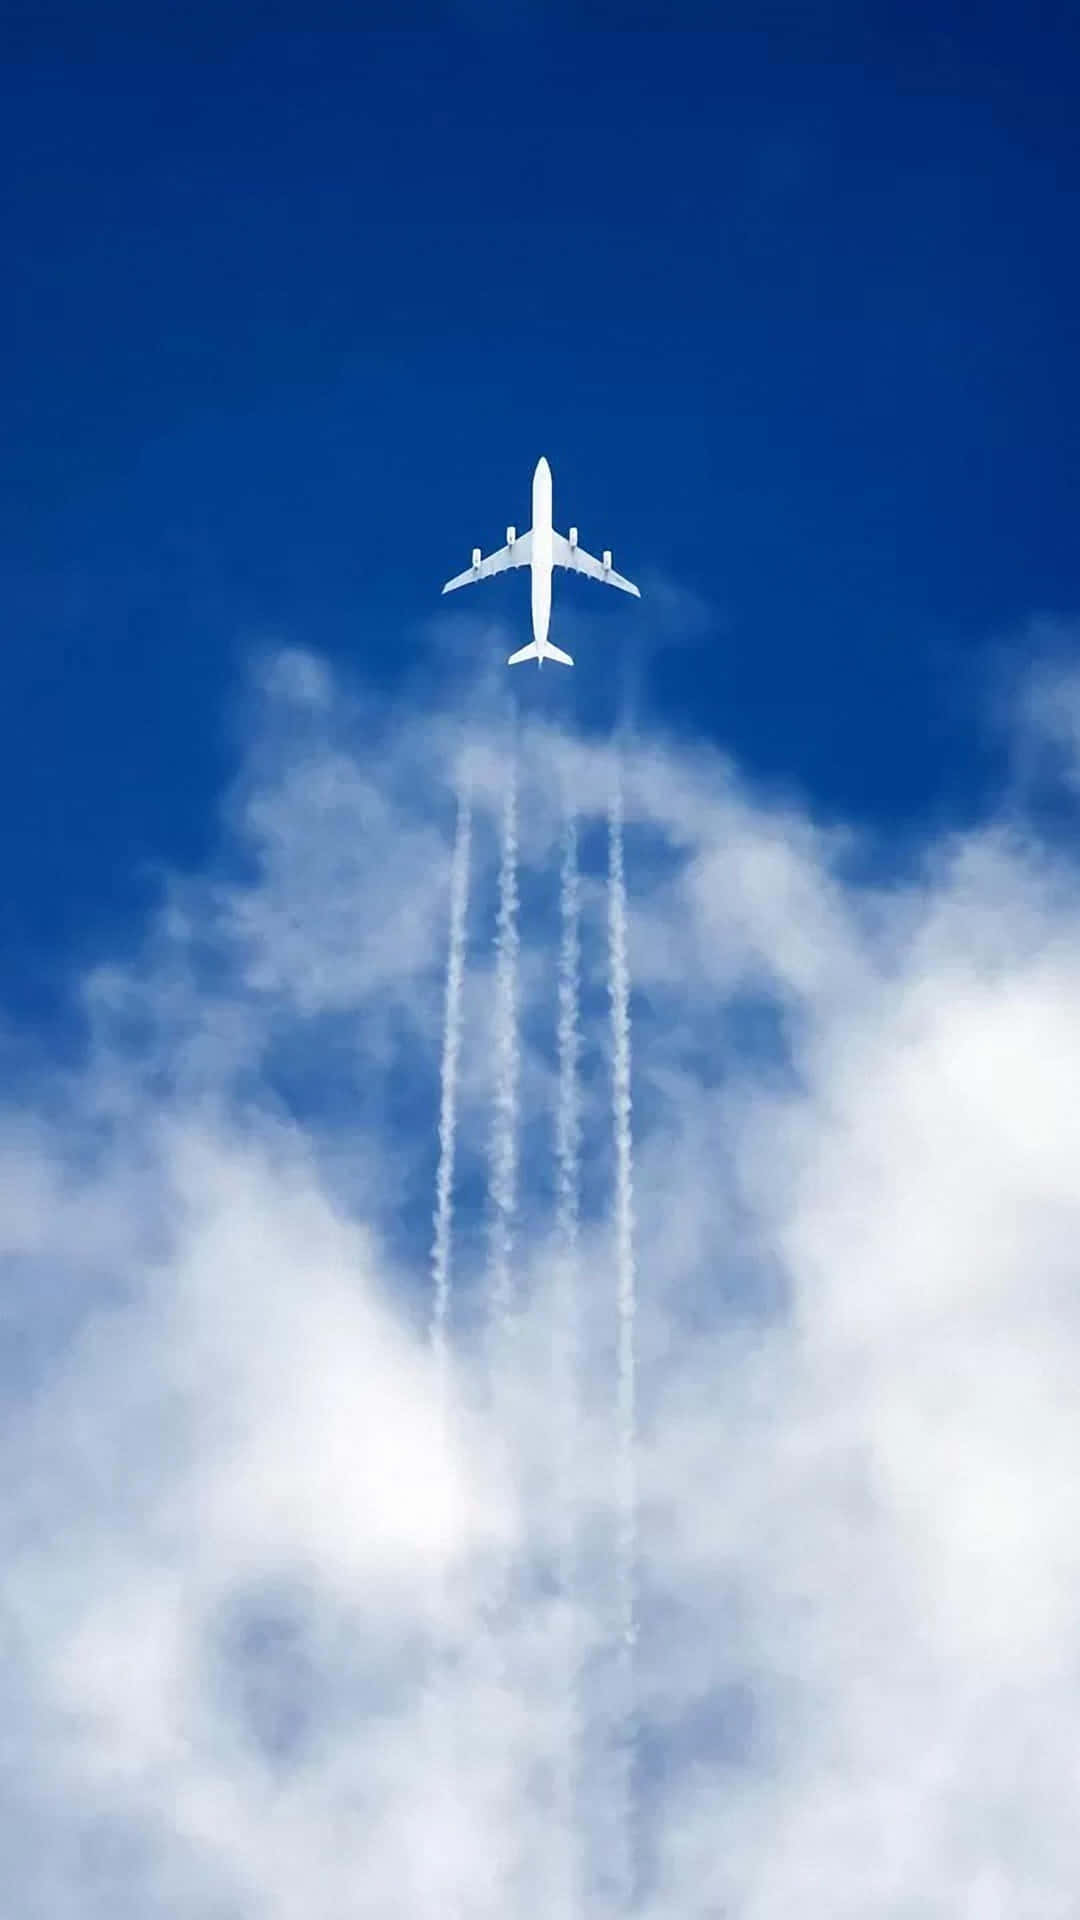 Airplane Leaving Four Smoke Trails Android Plane Background